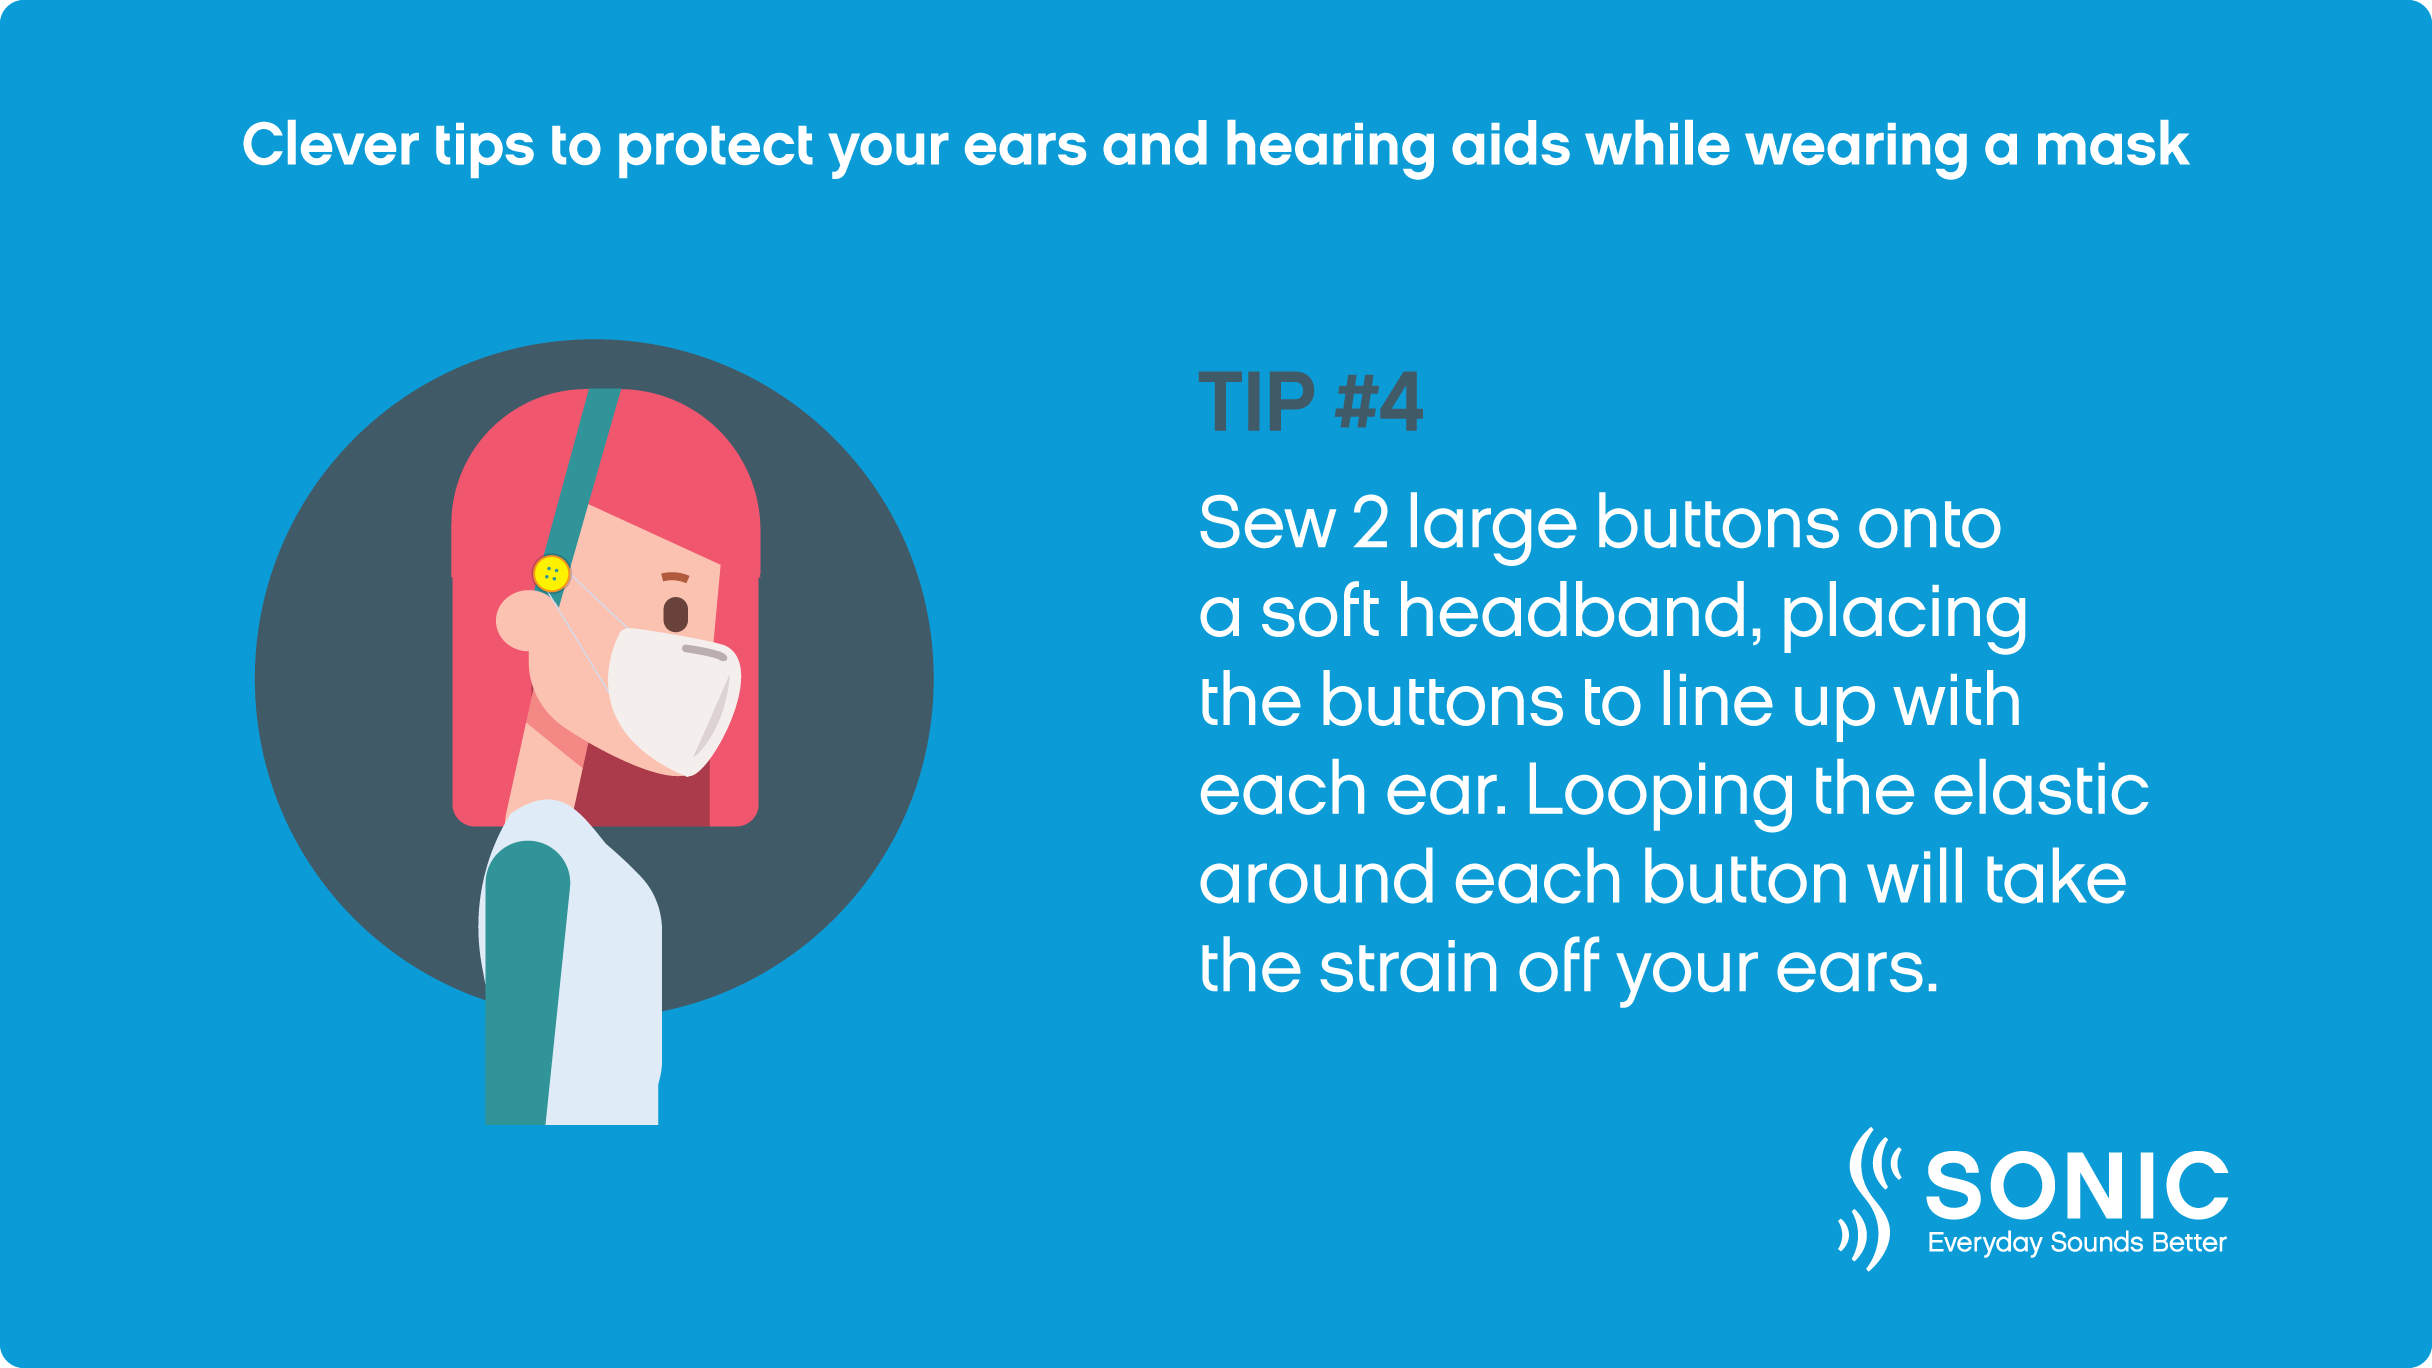 face-mask-and-hearing-aids-sonic-tip-4